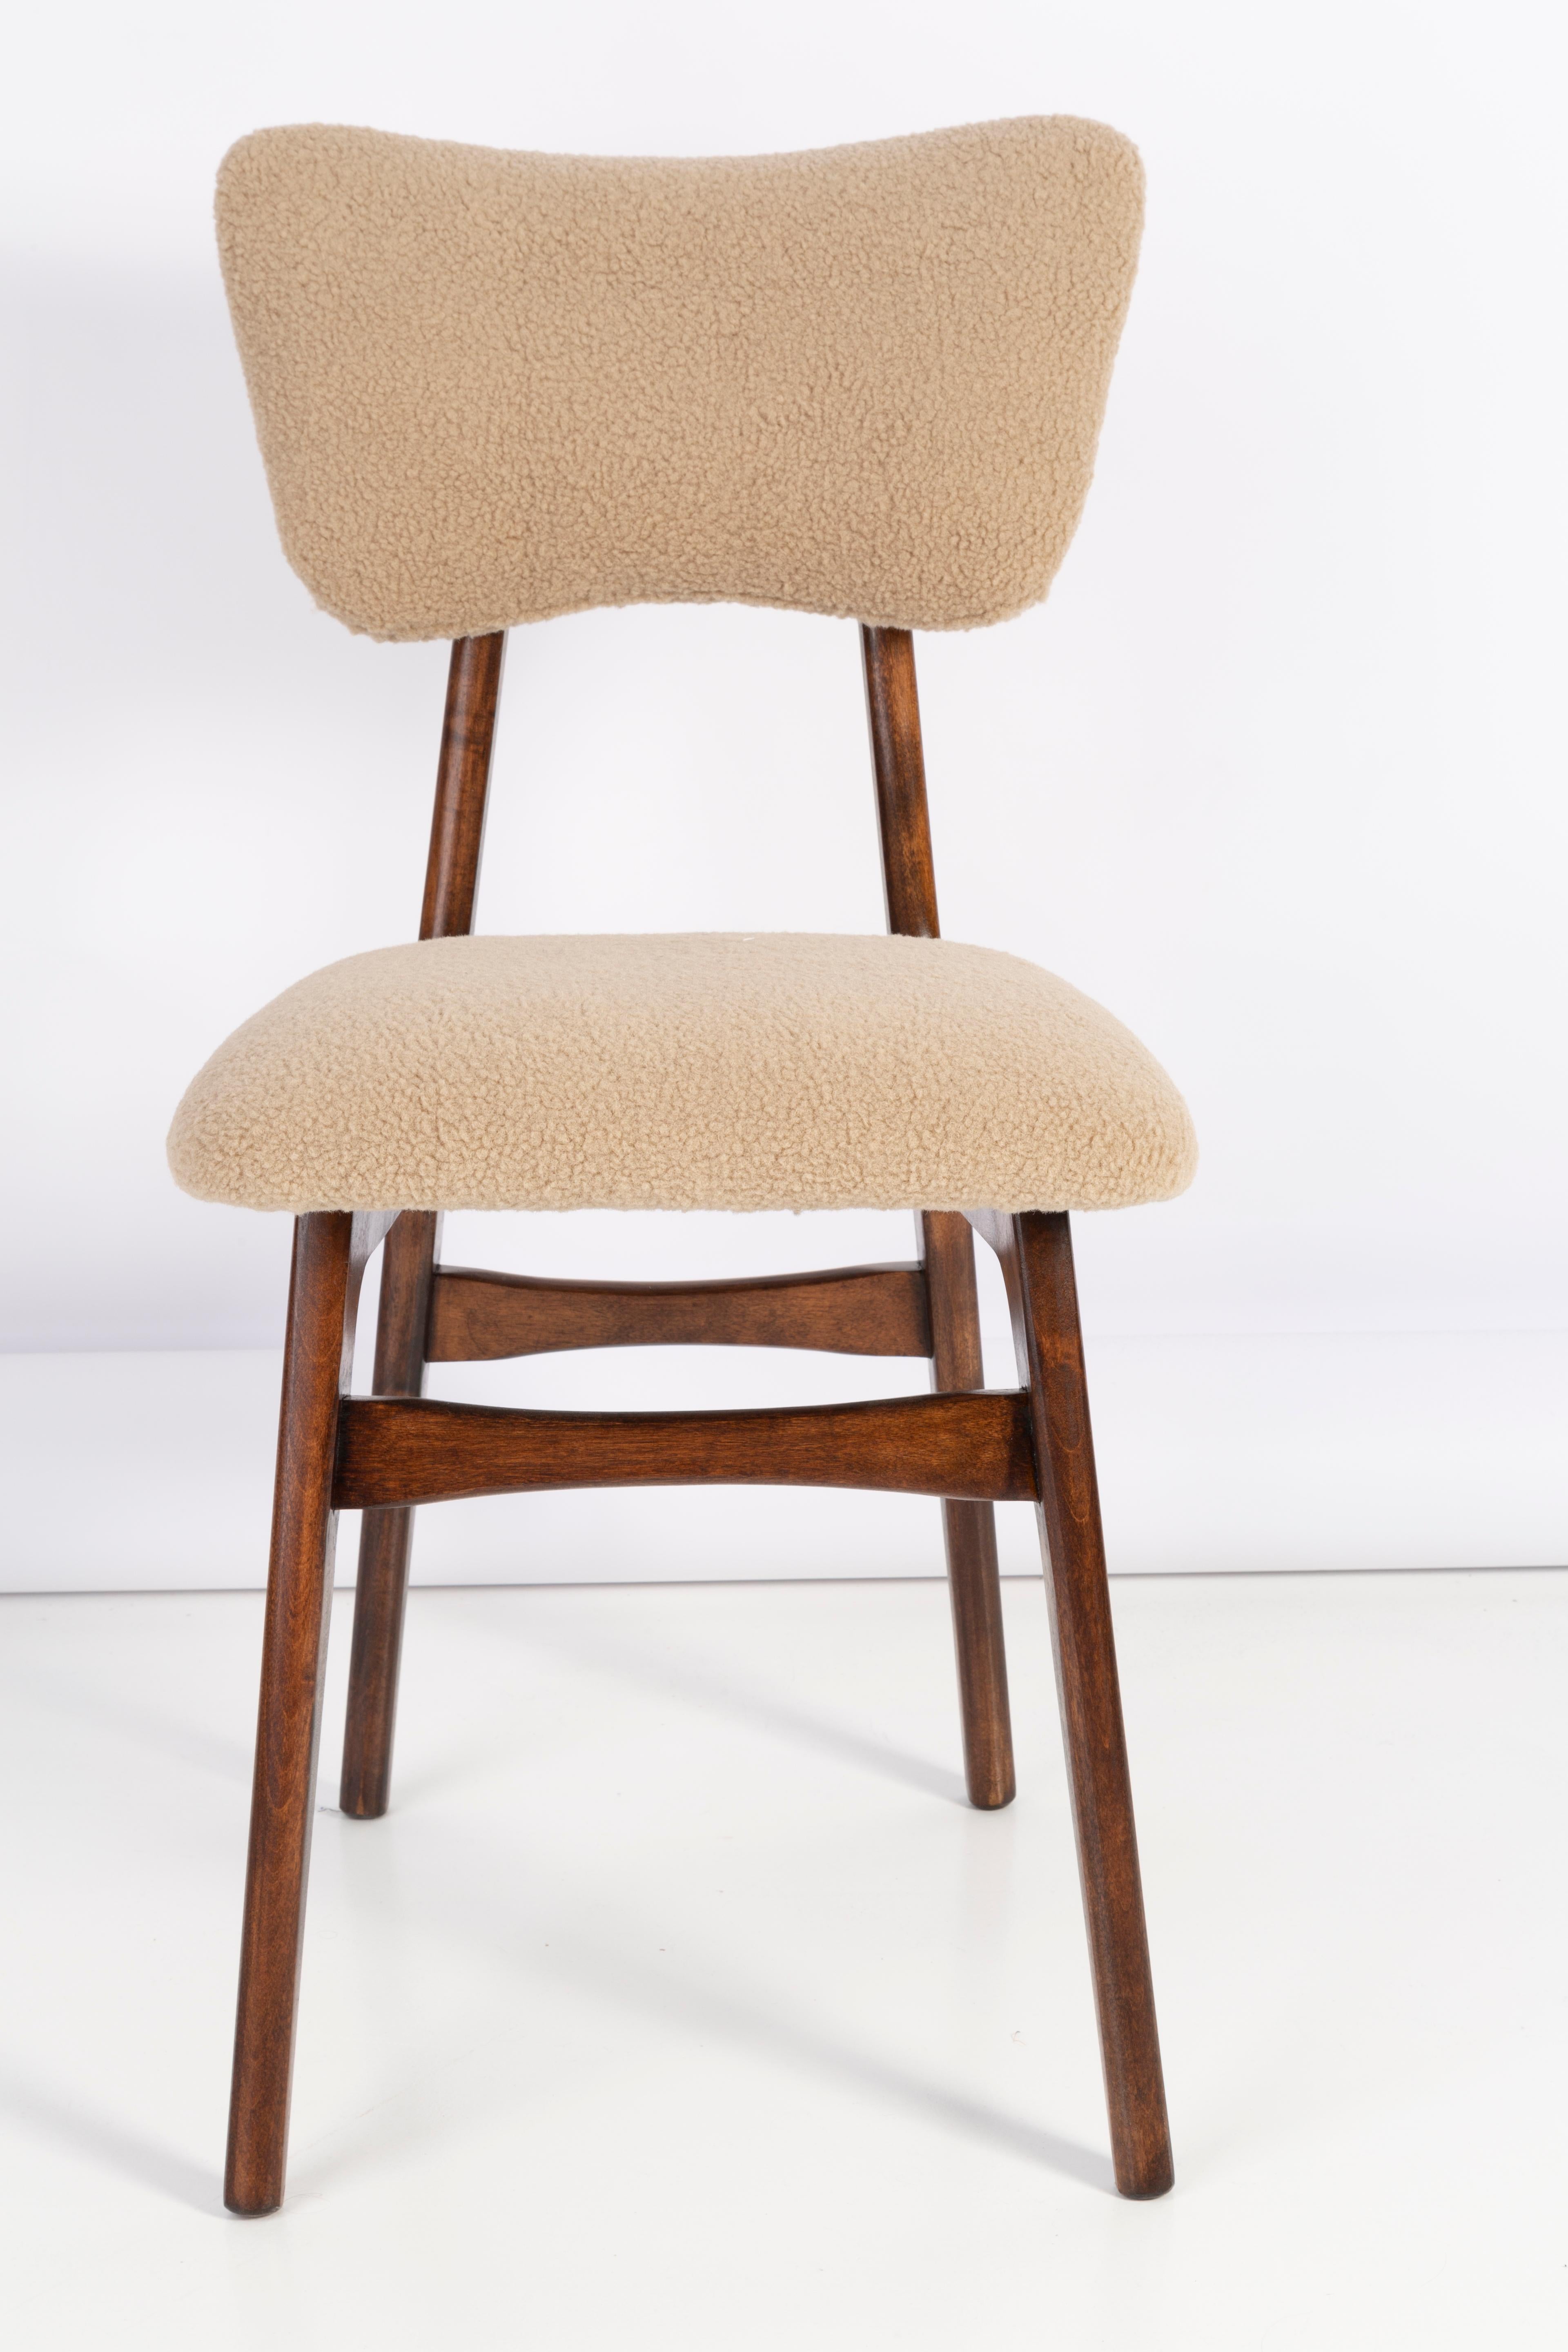 20th Century Camel Soft Boucle Chair, 1960s For Sale 3